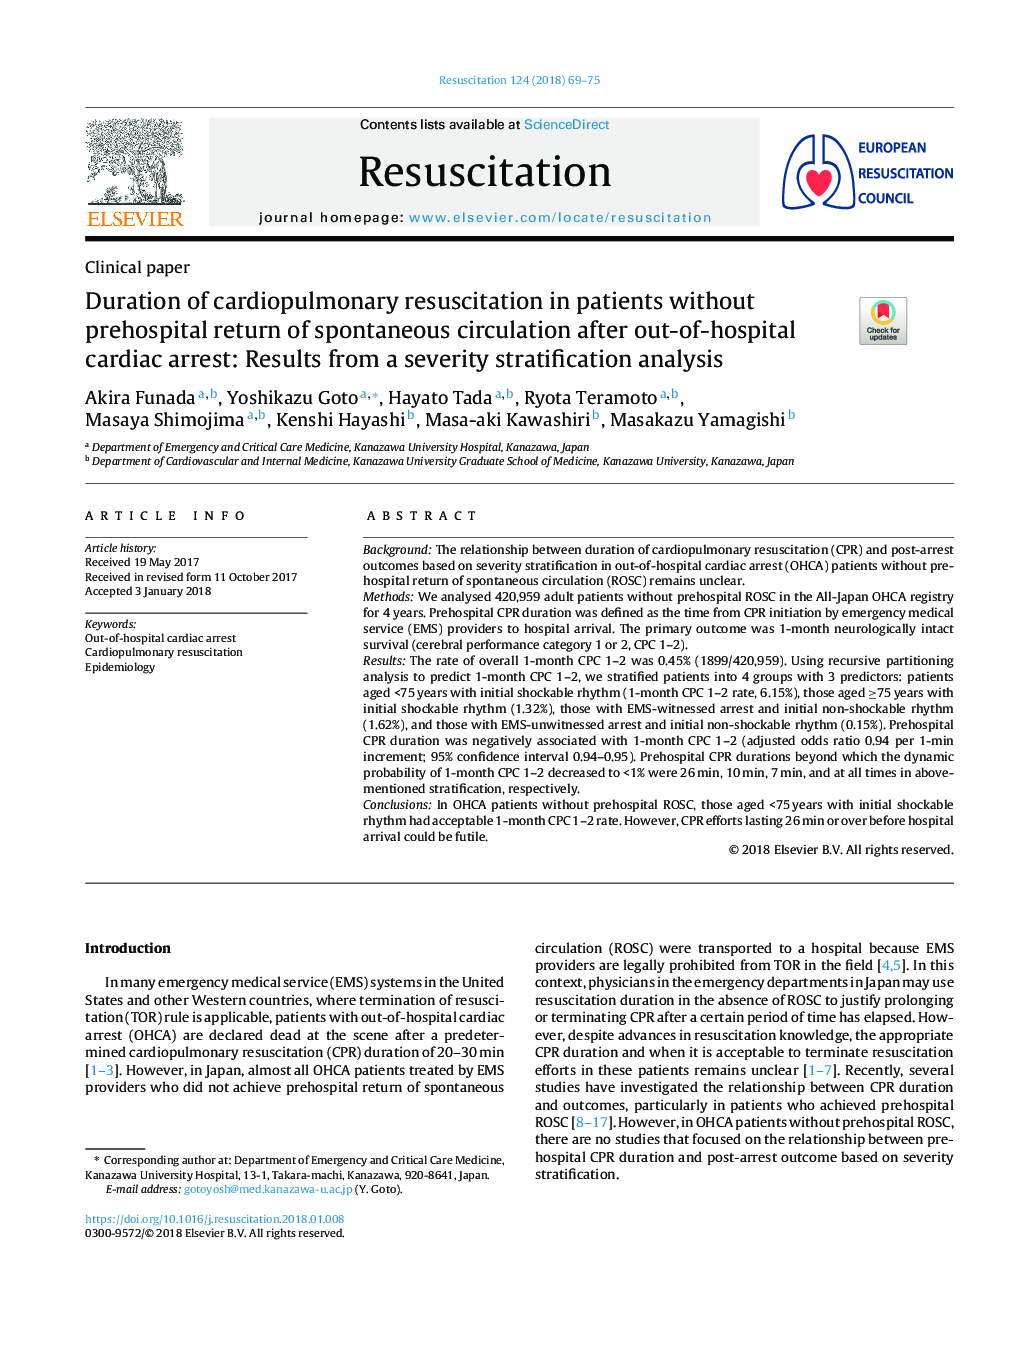 Duration of cardiopulmonary resuscitation in patients without prehospital return of spontaneous circulation after out-of-hospital cardiac arrest: Results from a severity stratification analysis